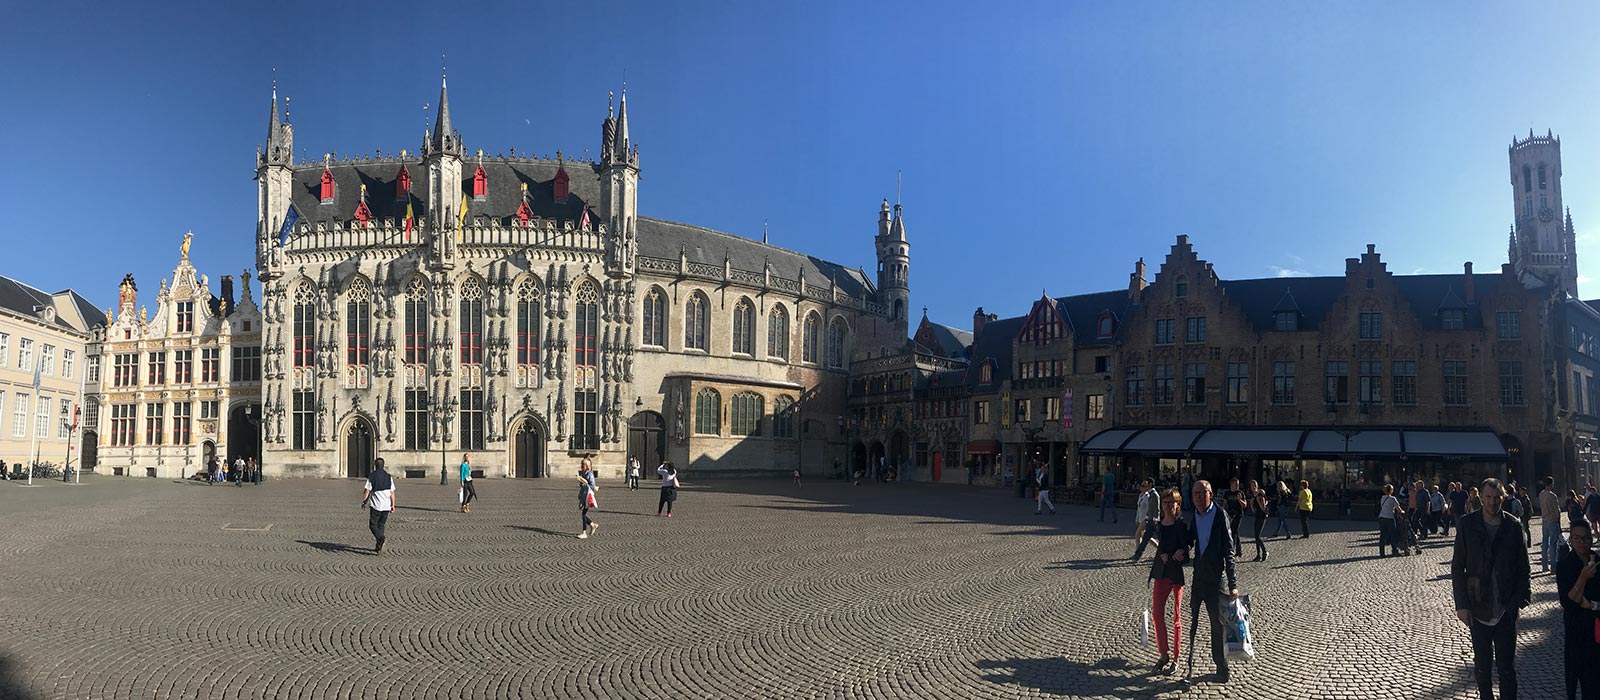 Beautiful architecture in Bruges, Belgium. The end of 2 years on the road; Slovenia, Luxembourg & Bruges